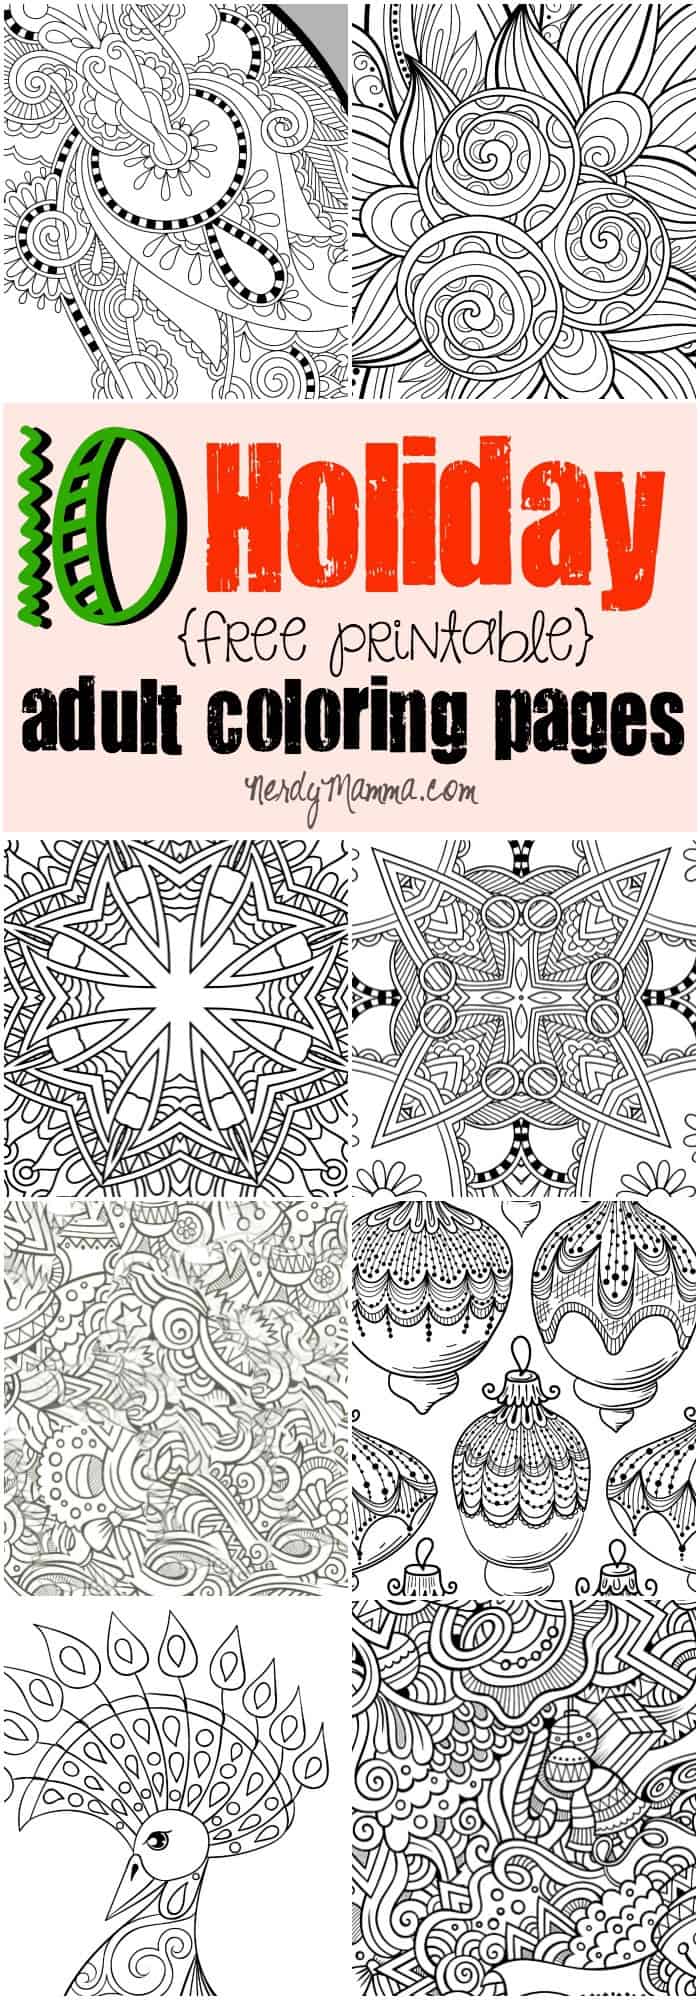 I love these 10 Free Printable Adult Coloring Pages. I mean, it's like a whole coloring book for adults right there for me to print! LOL!